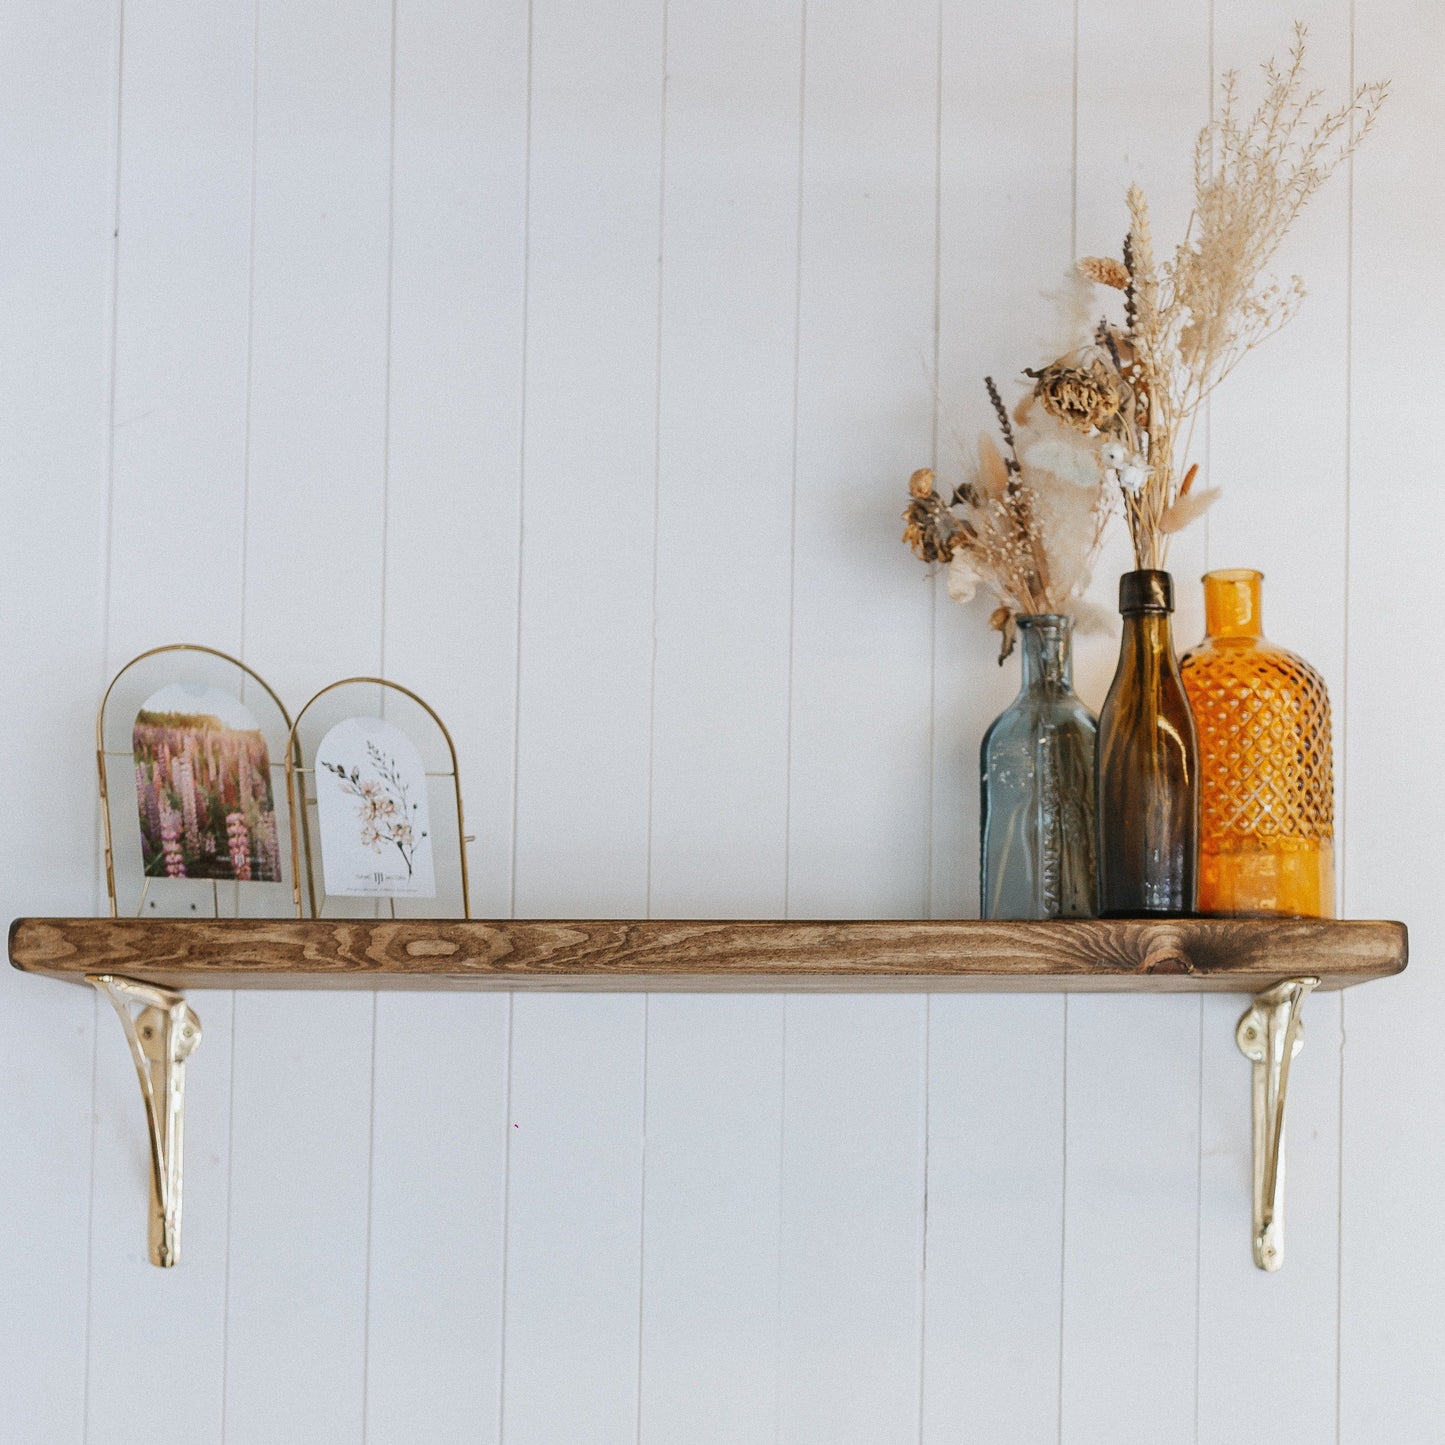 Scaffold Shelves with Brackets - 96 cm by 30 cm